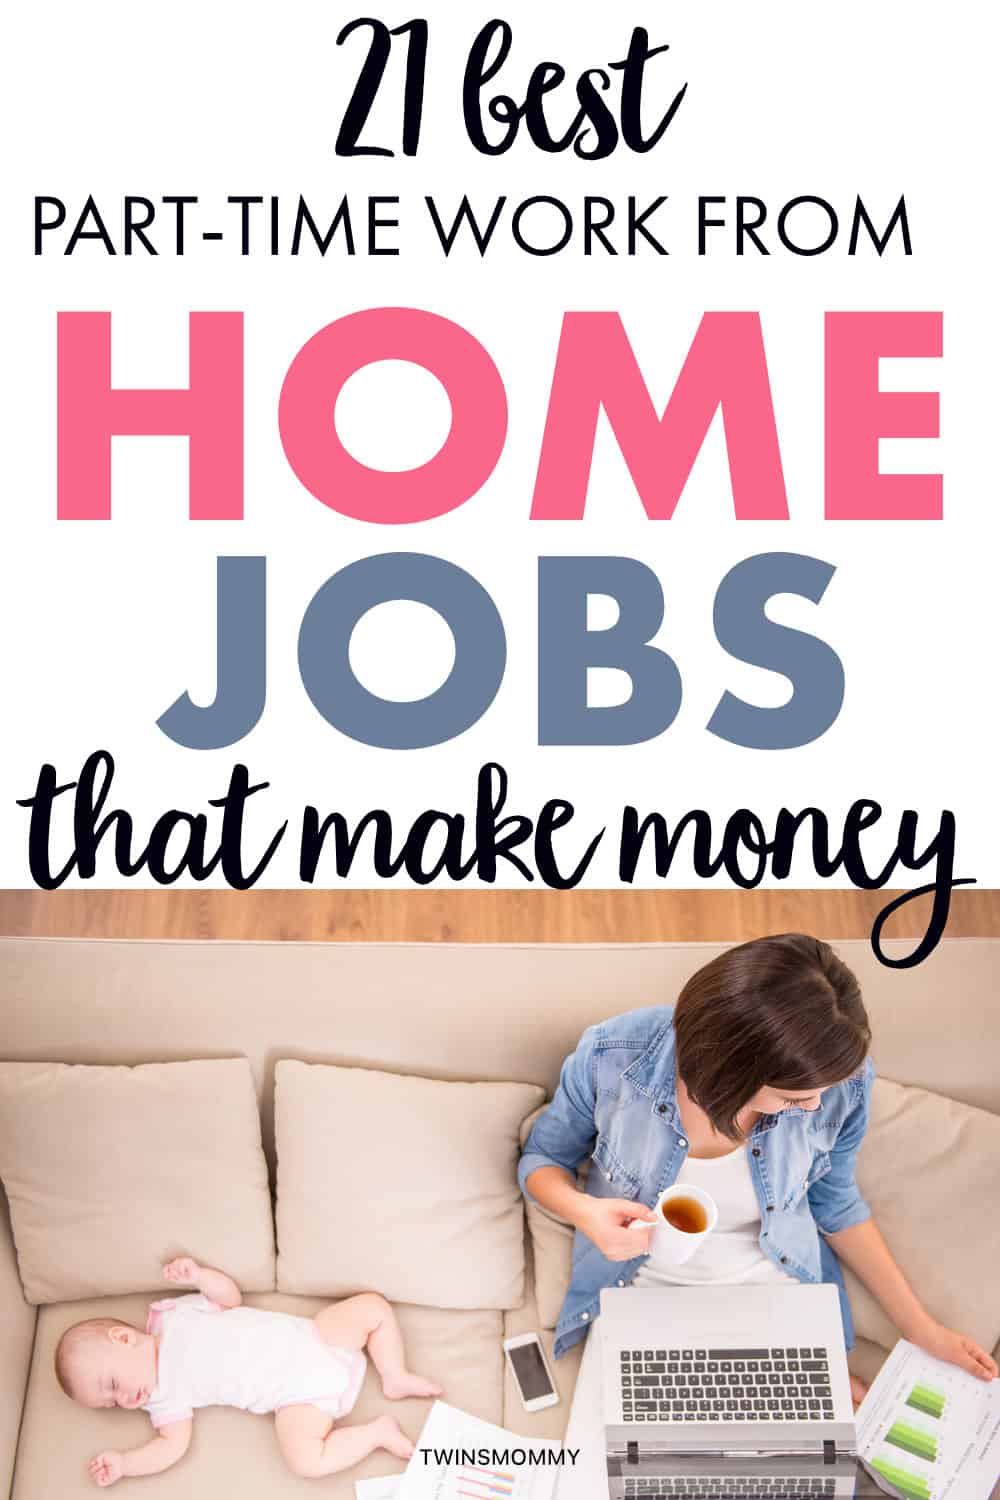 work from home jobs 6 figures